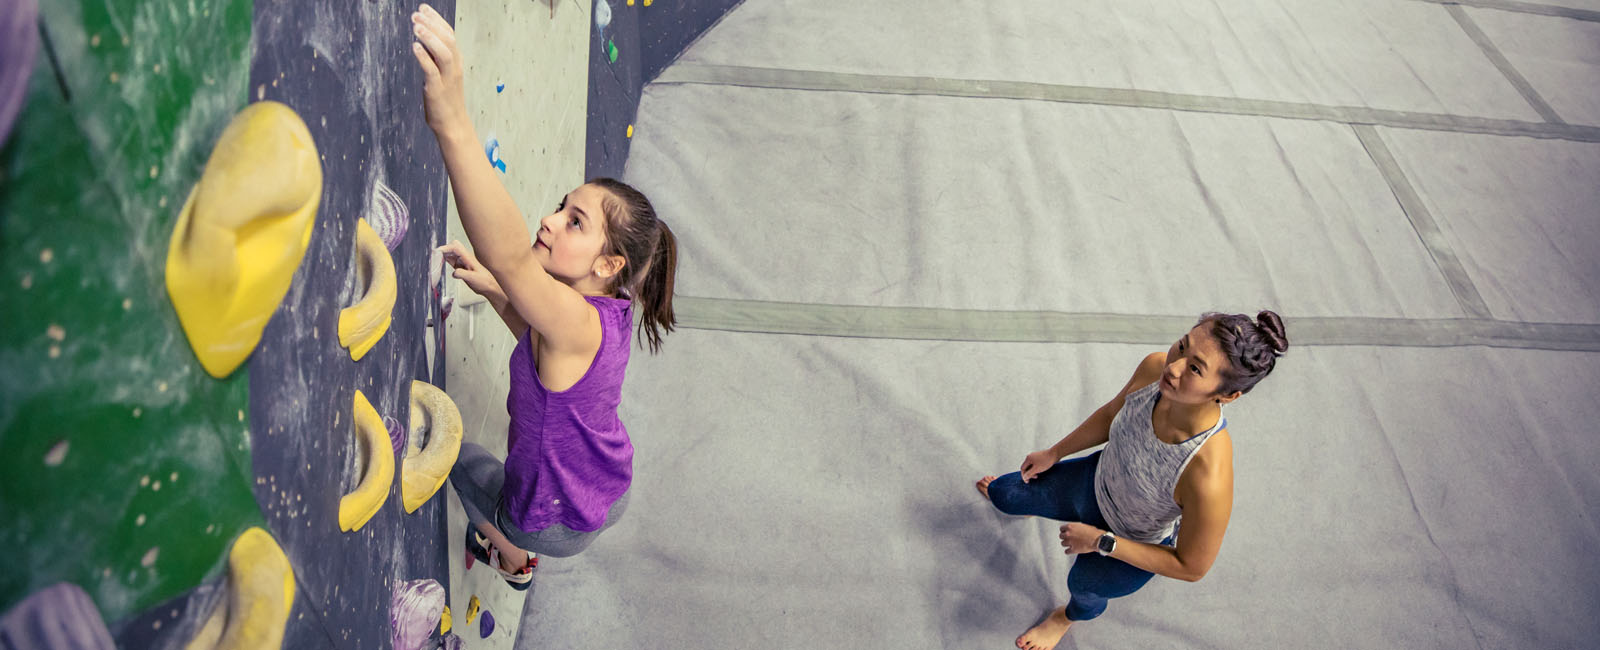 young girl bouldering with woman watching